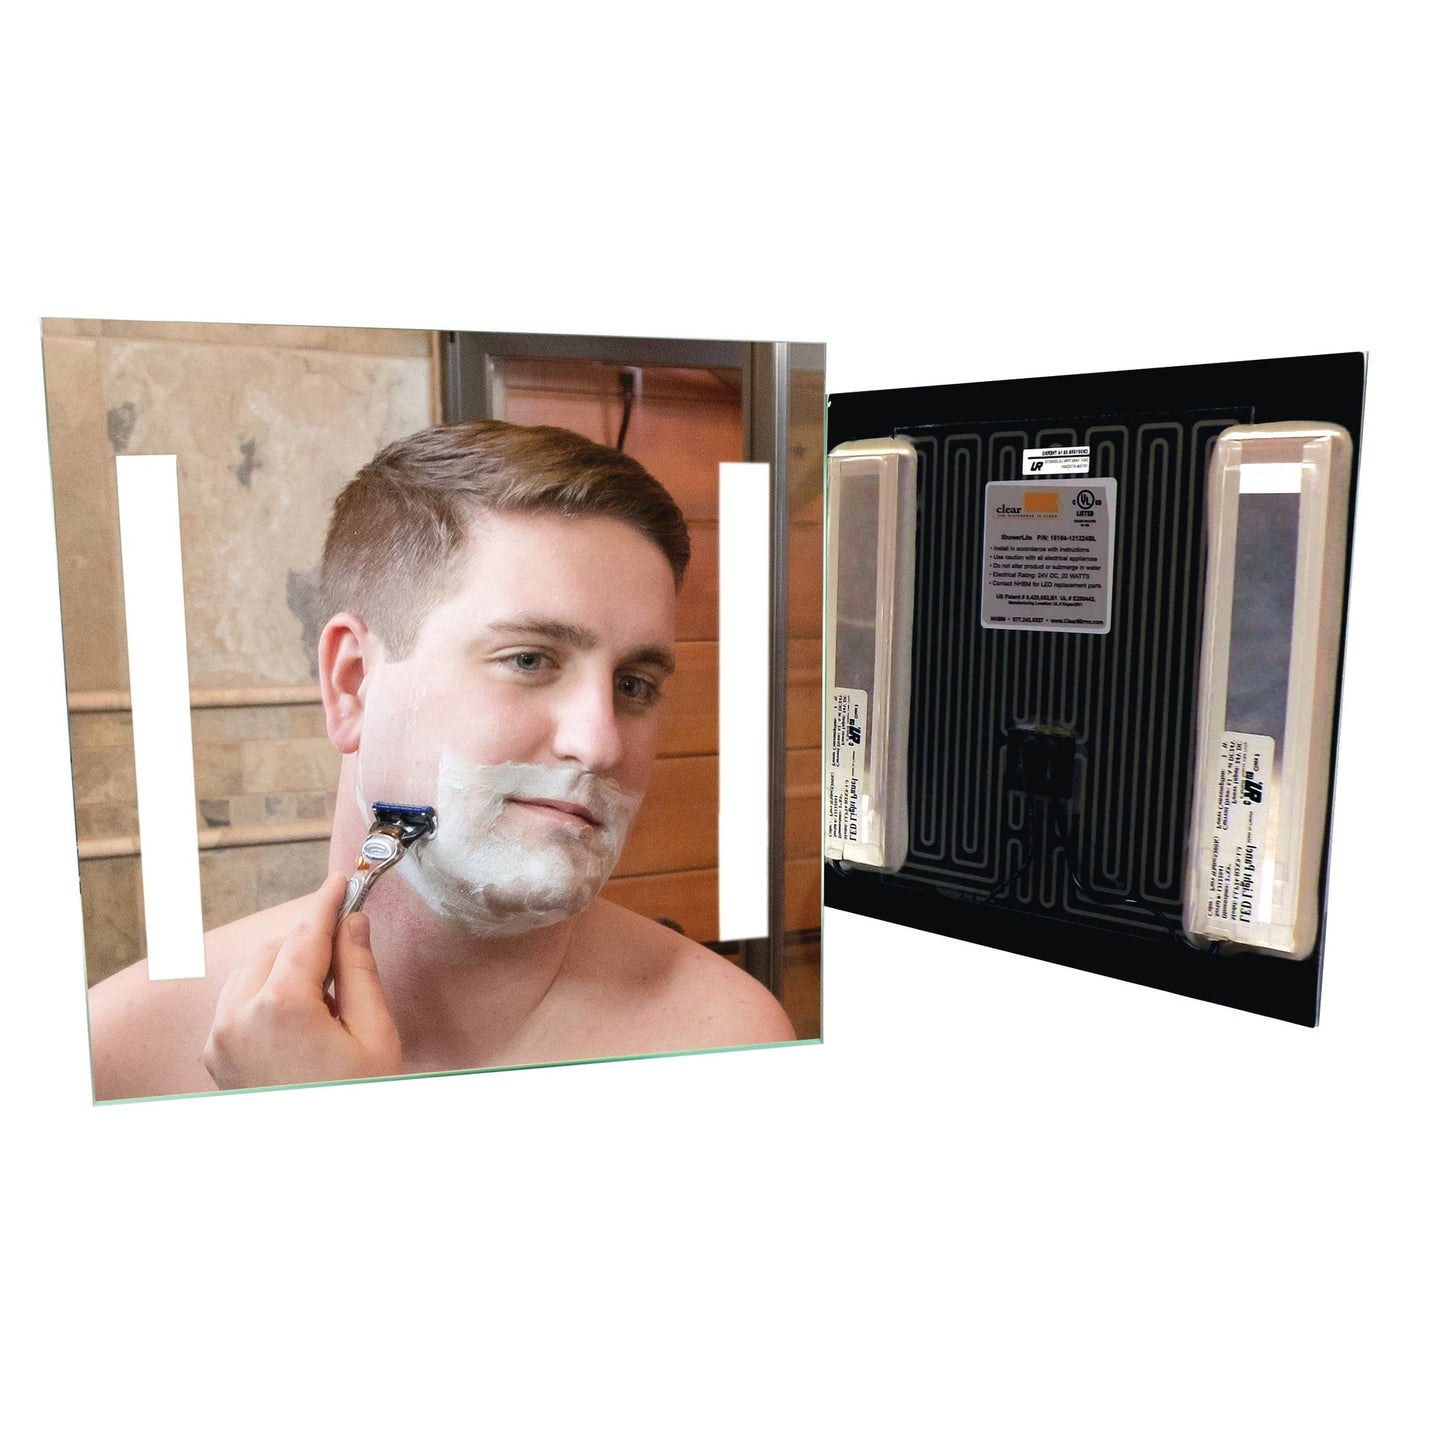 ClearMirror ShowerLite 18" x 18" Fog-Free Shower Mirror With LED Light Panels and Heating Pad